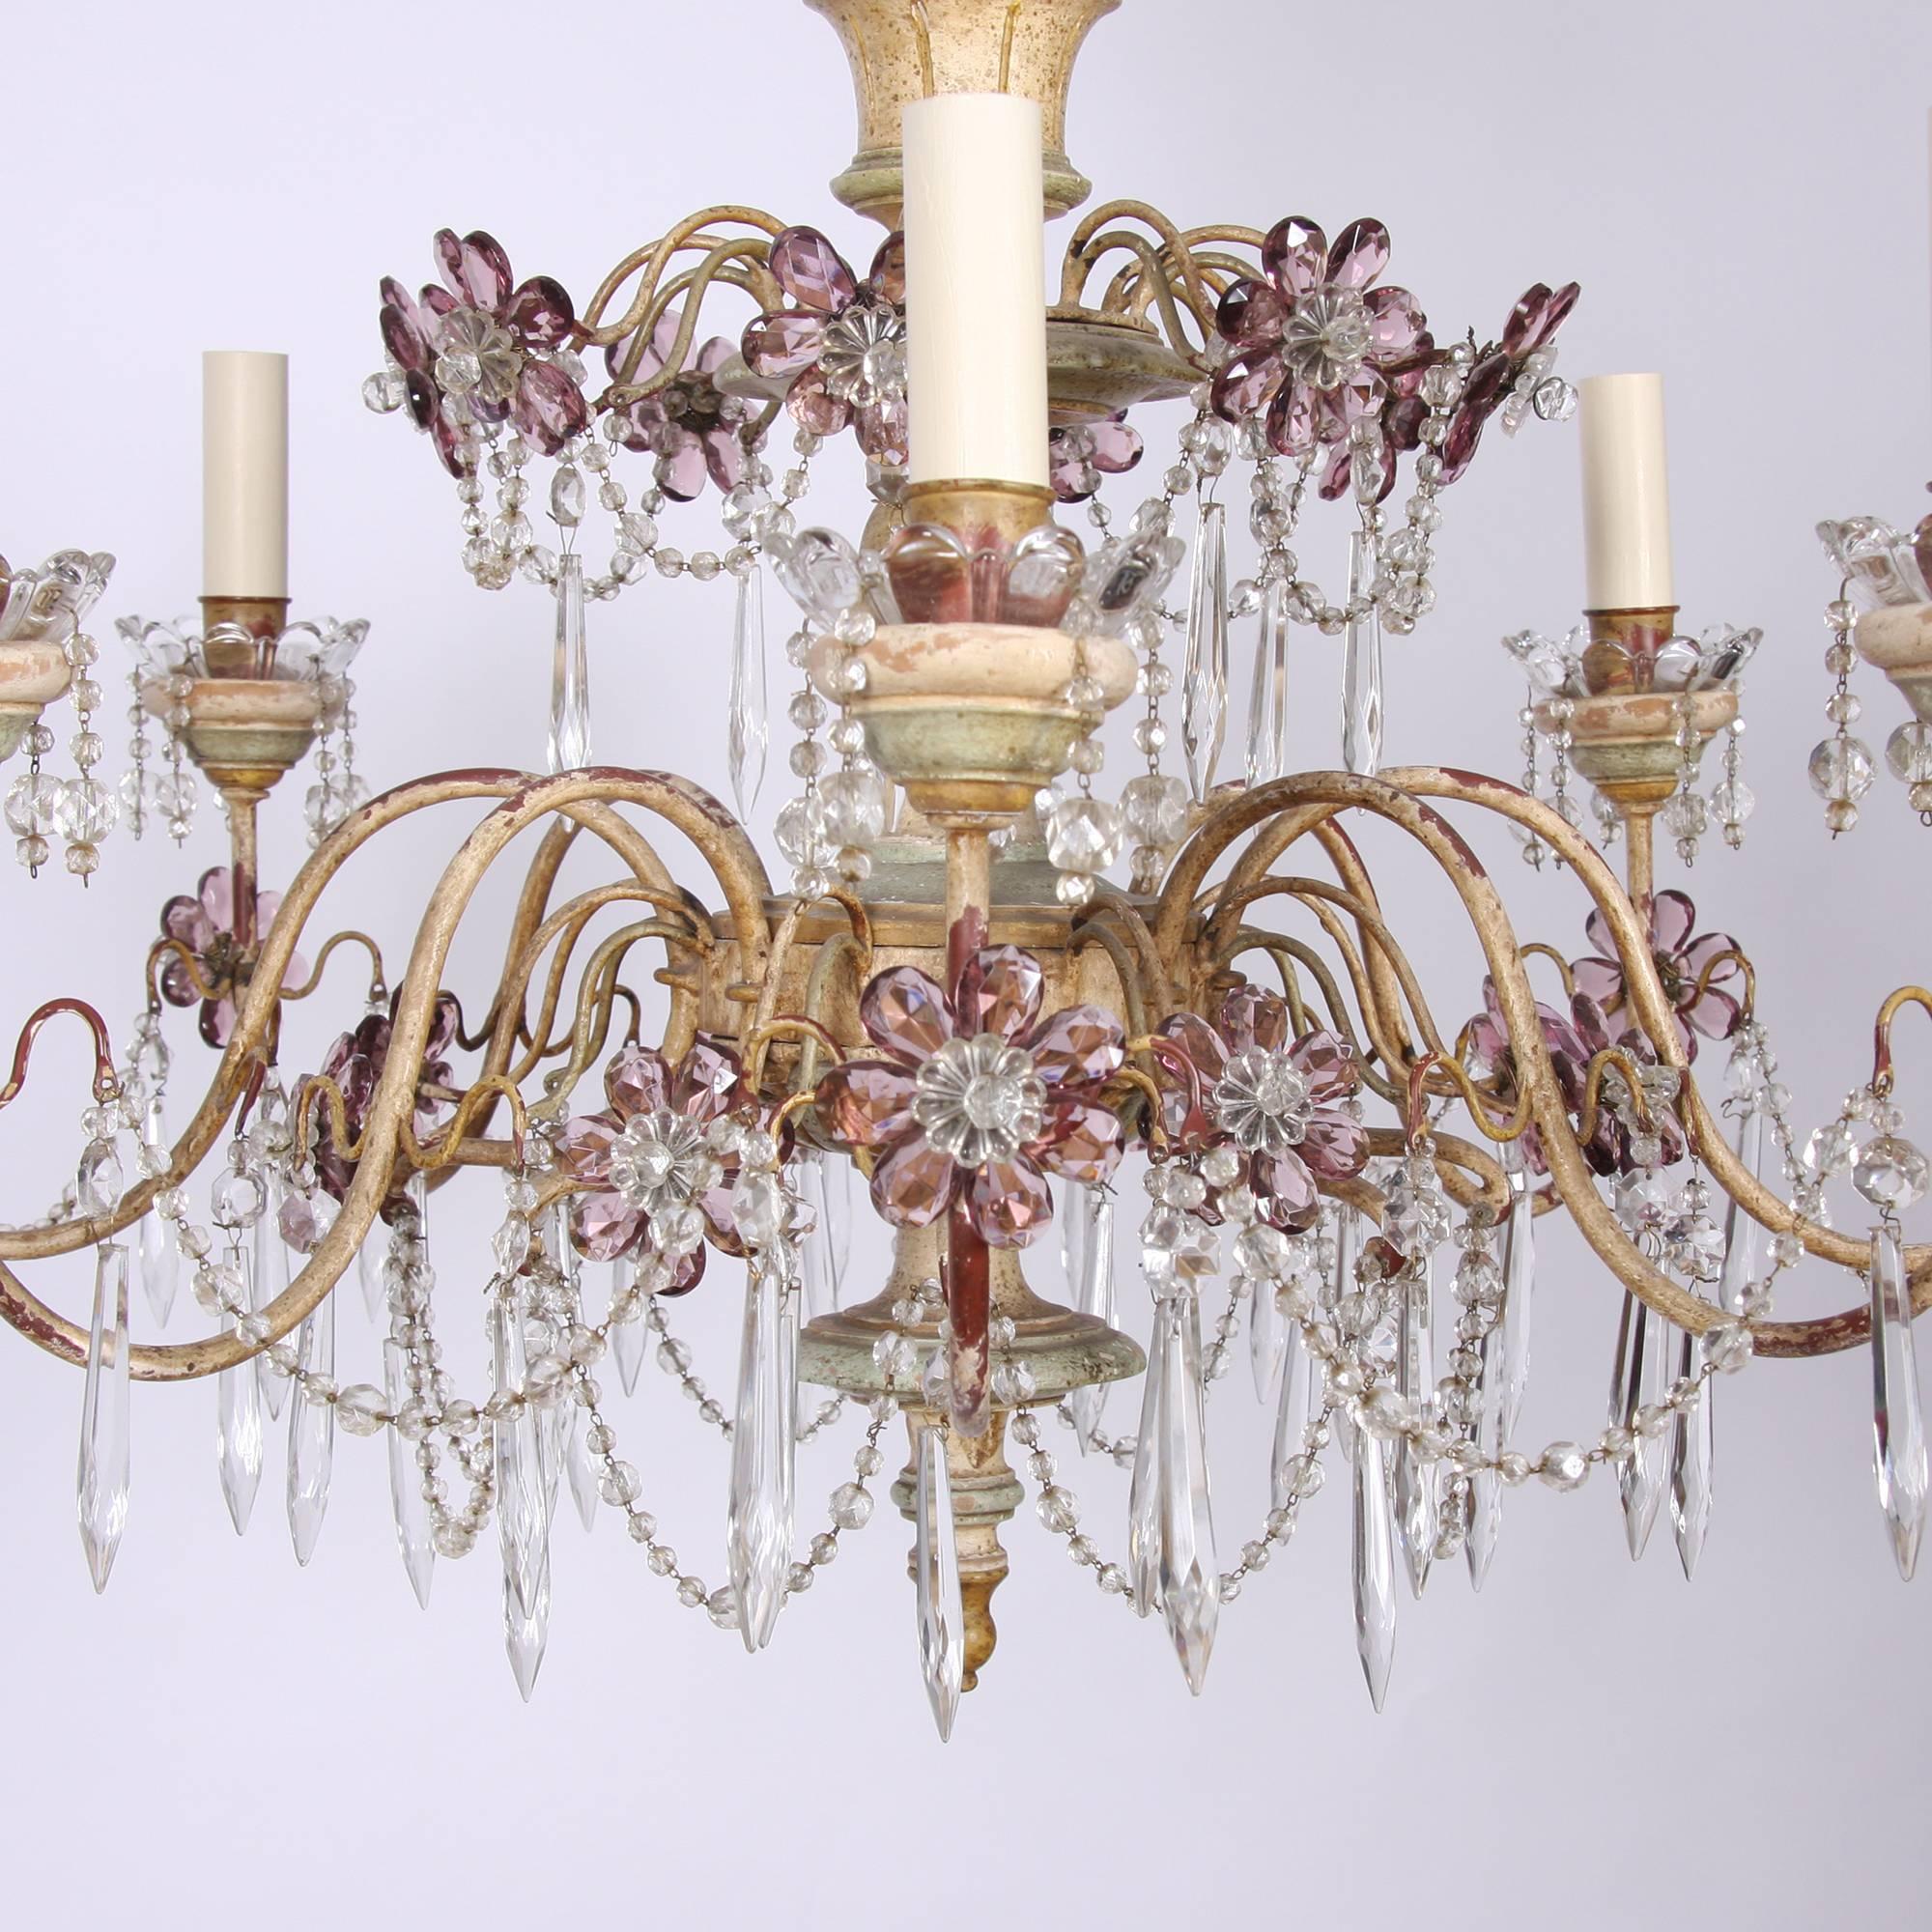 Beautiful chandelier painted cream and pale green, with eight arms. Painted carved wood column, with painted metal arms. Beautiful icicle drops with amethyst colored glass flowers. Original ceiling rose. Fully re-wired.